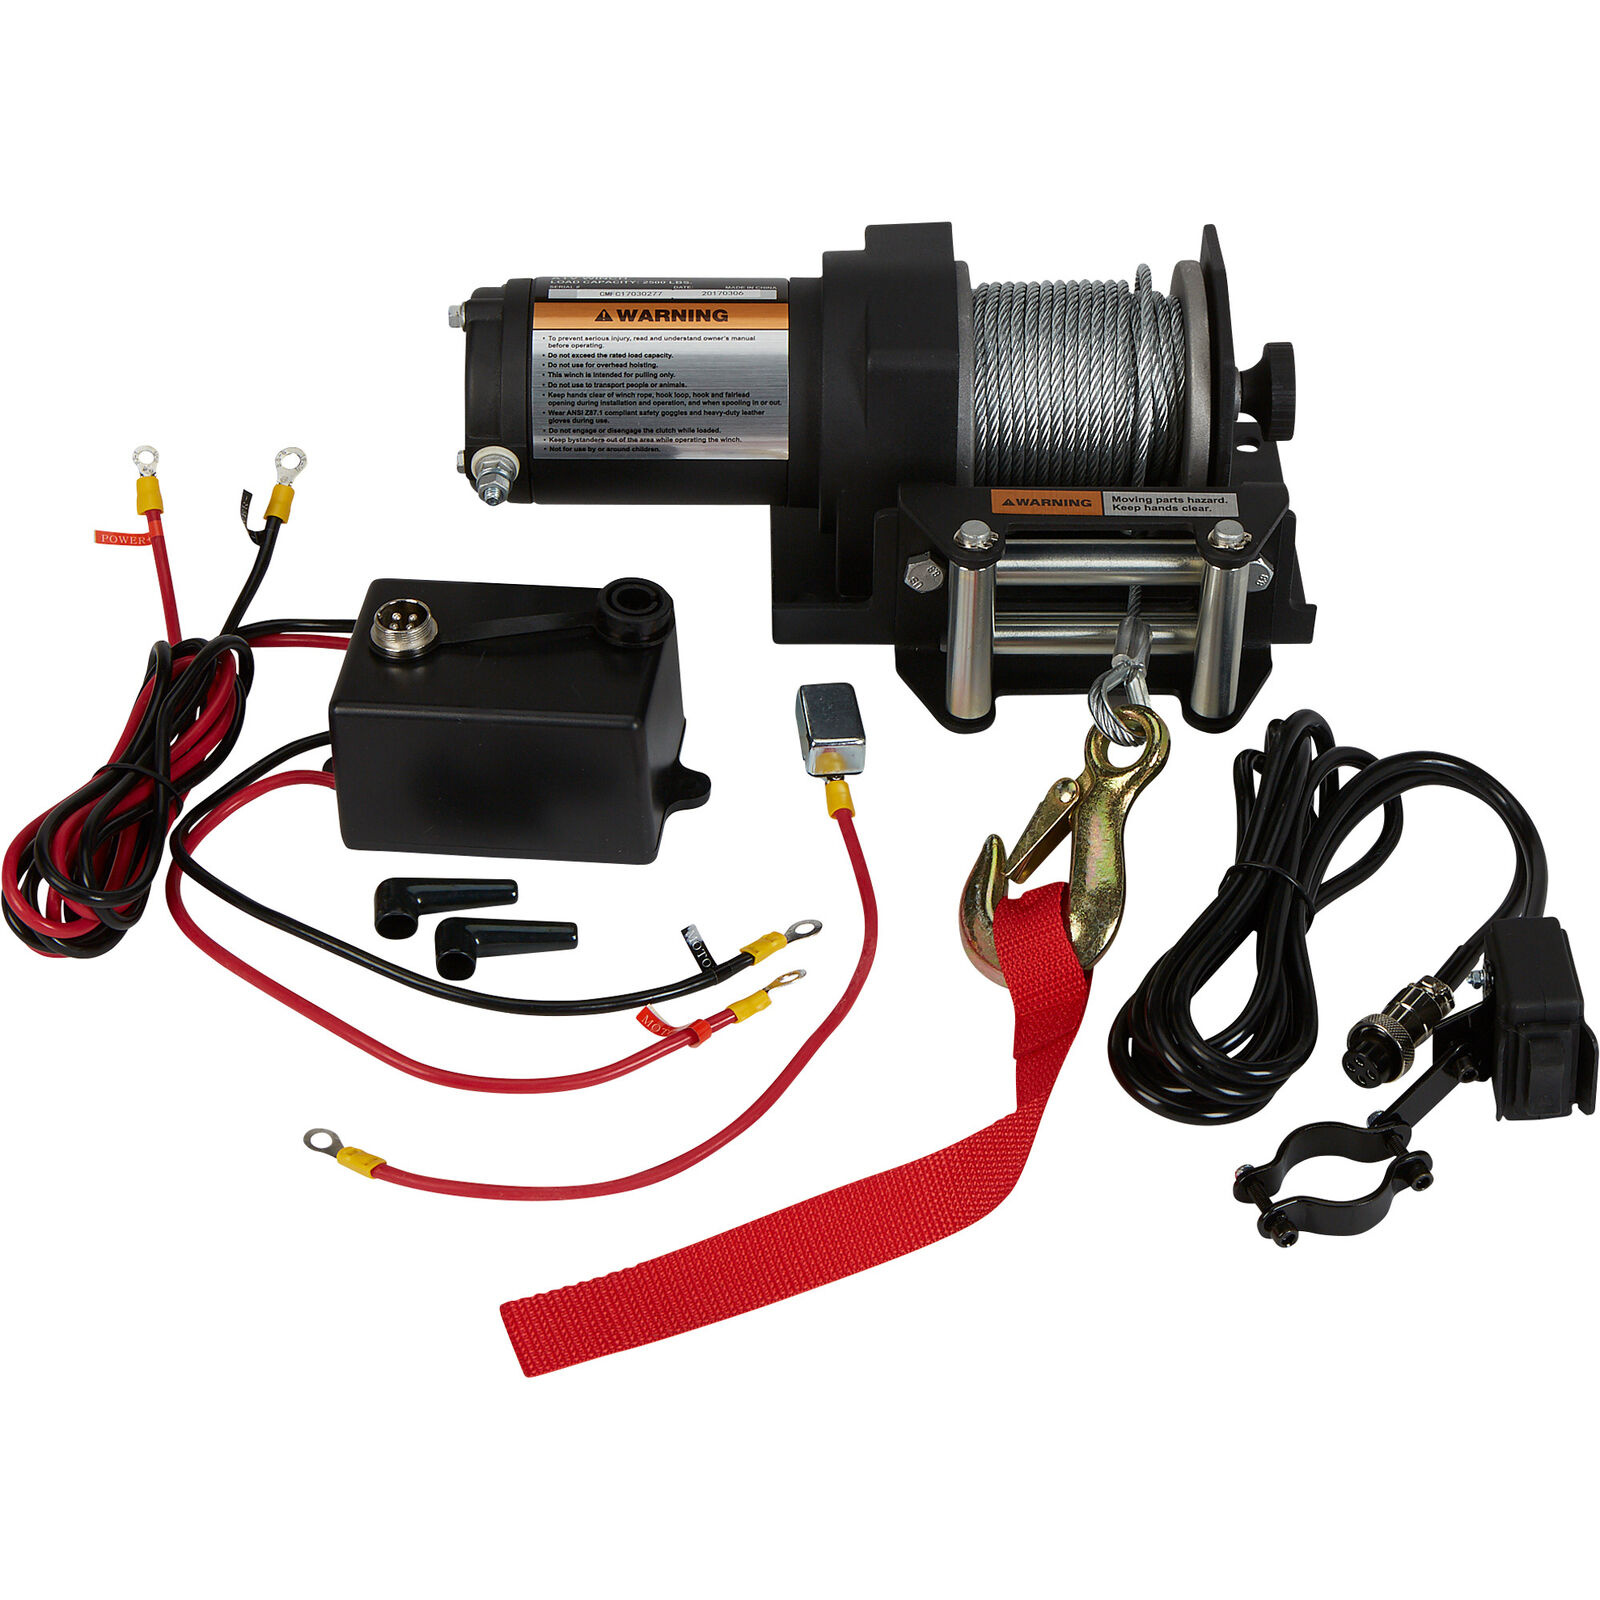 Ironton 12v Dc Powered Electric Atv Winch- 2500-lb Capacity Steel Wire Rope